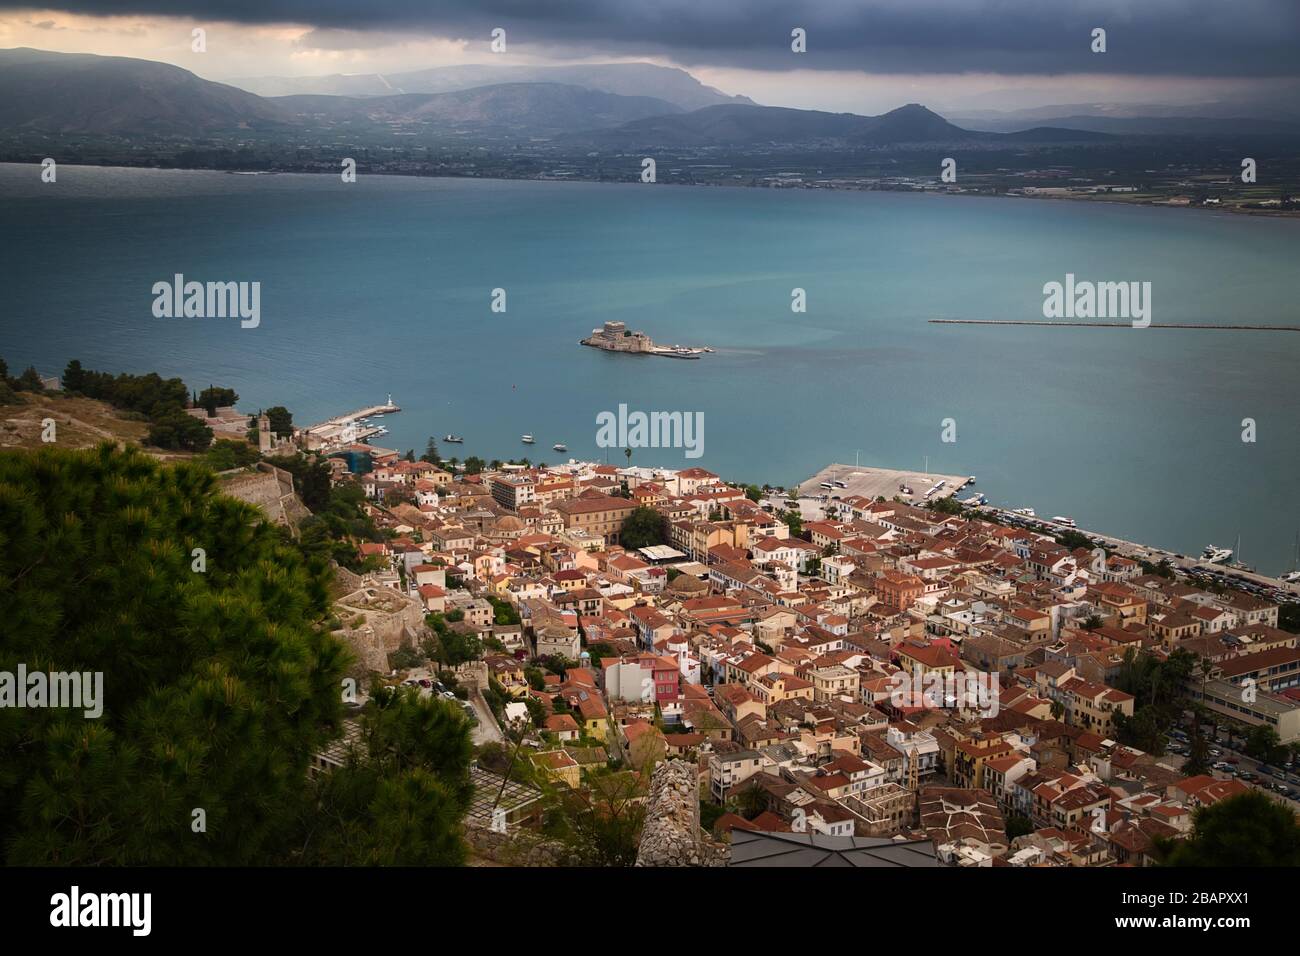 Old town of Nafplion in Greece, view from above with tiled roofs, small port and Bourtzi castle on the Mediterranean sea water Stock Photo